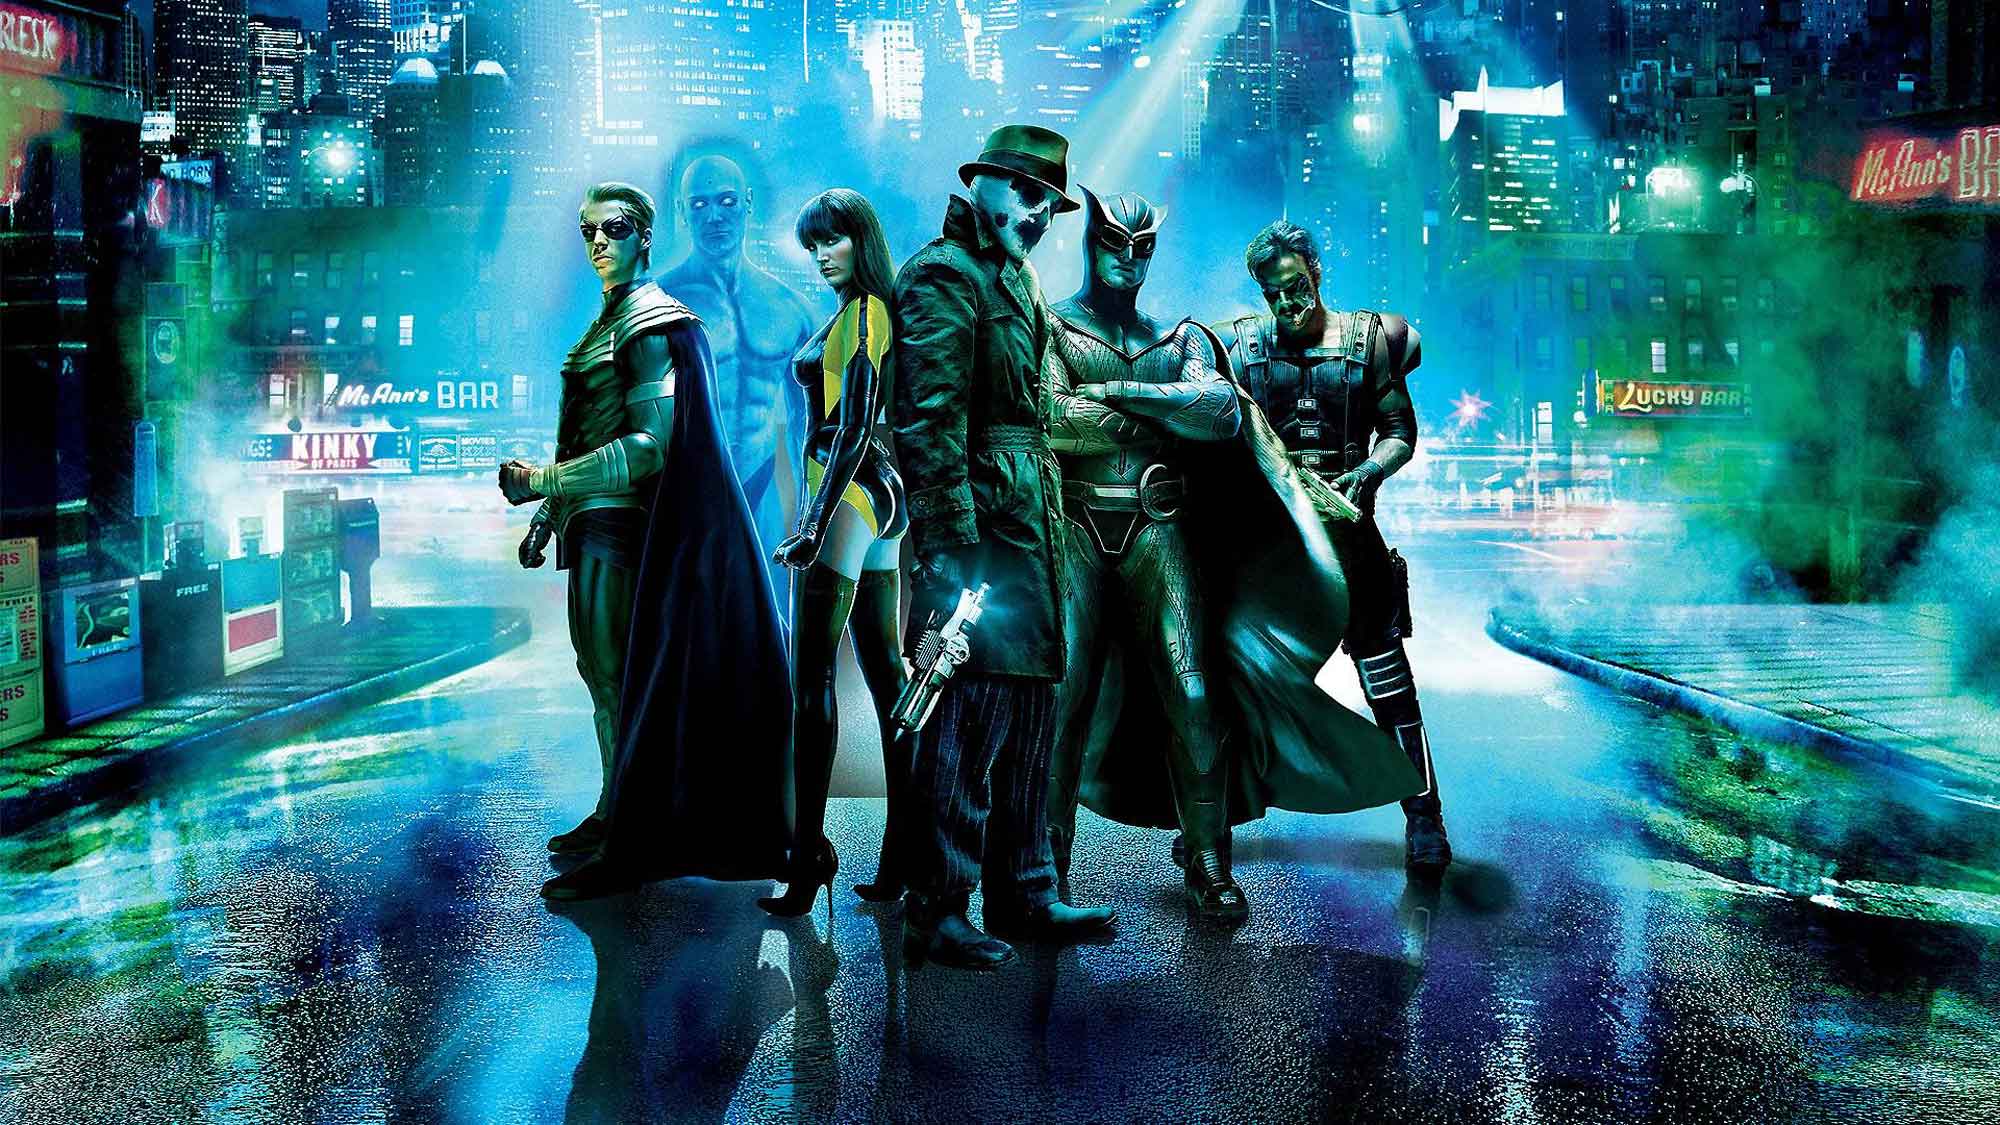 New Watchmen Movie Poster Helps Gets Fans Excited For Upcoming Film (2008)